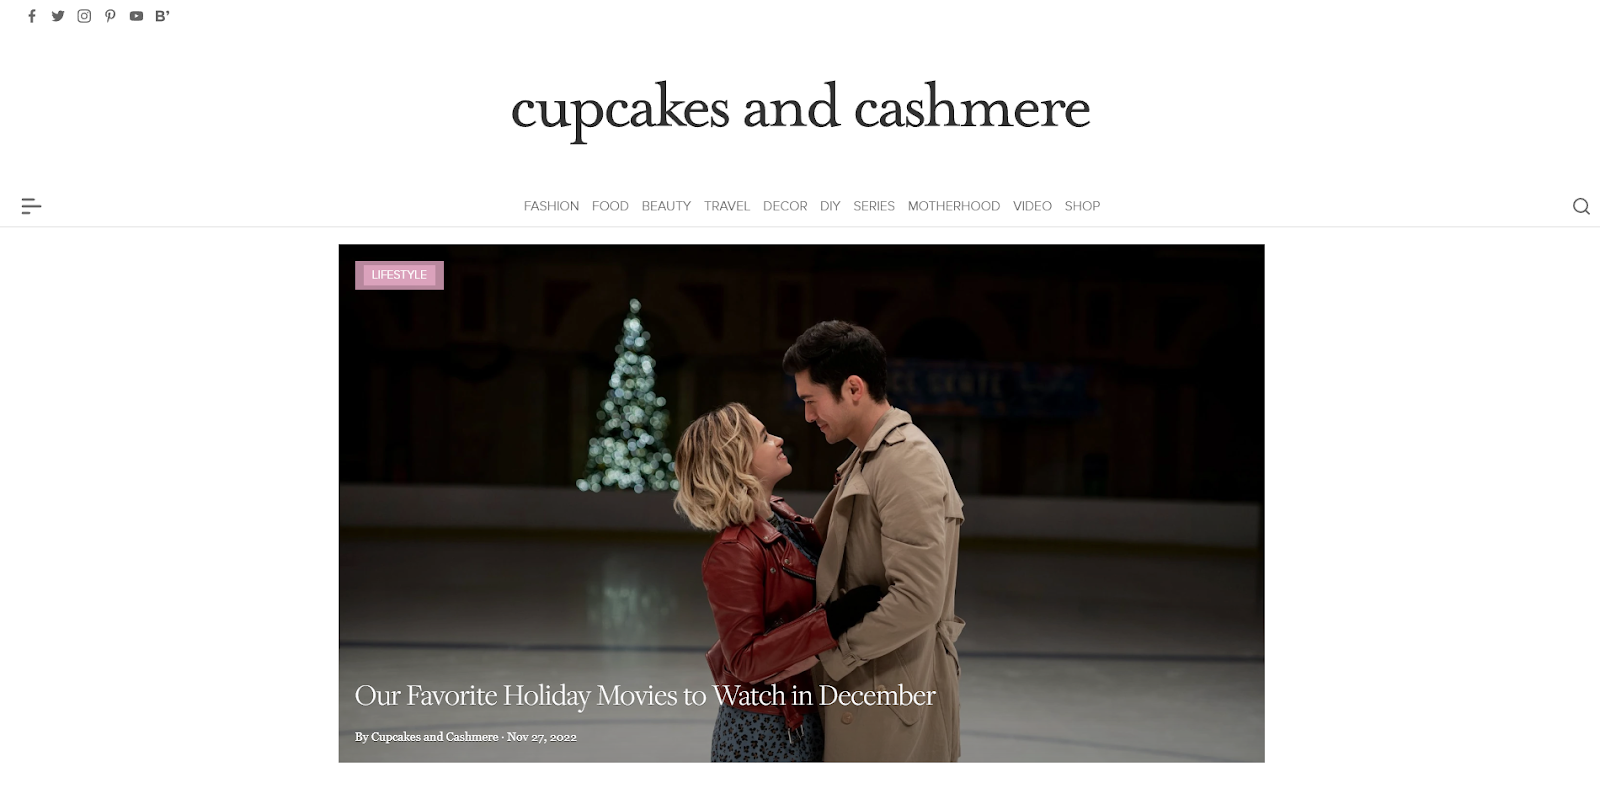 Cupcakes and Cashmere Lifestyle Blogs for Inspiration